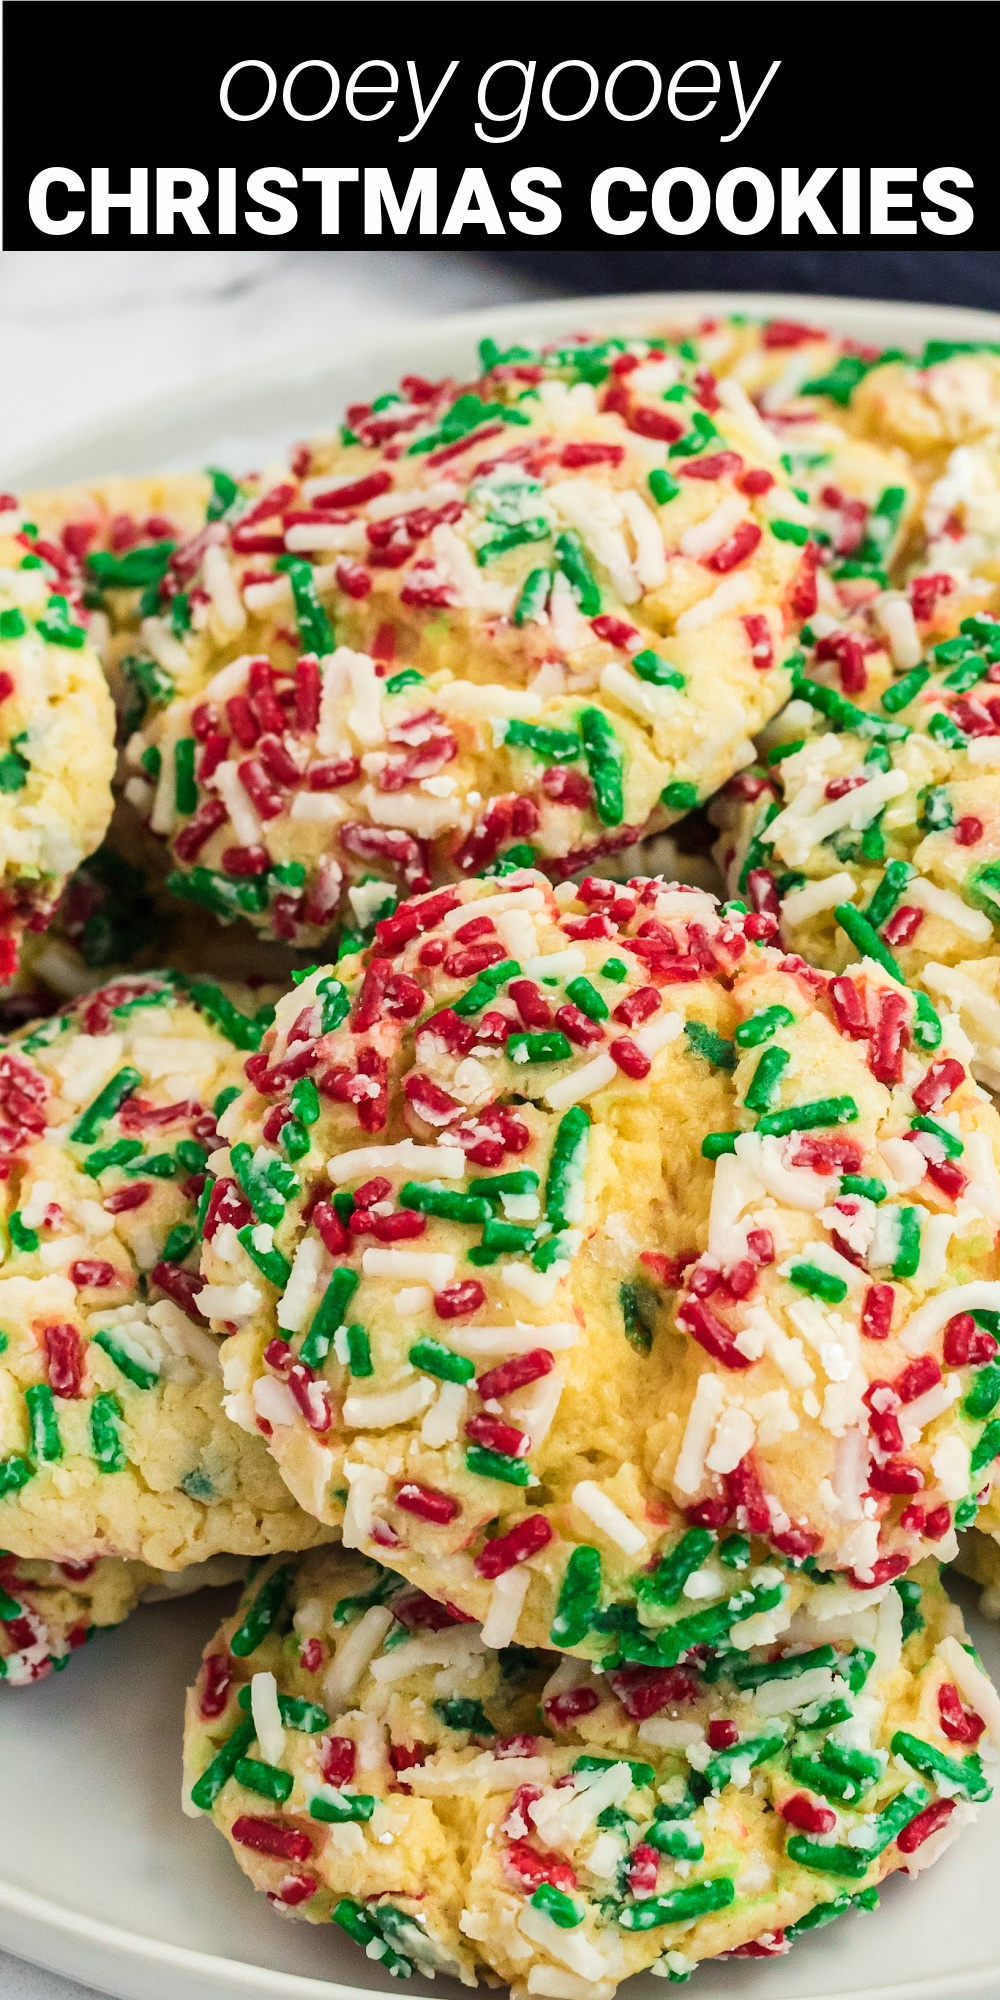 These rich and decadent Ooey Gooey Butter Christmas Cookies are so deliciously soft they will literally melt in your mouth. They're perfect little confections that are easy to make and are guaranteed to be a crowd pleaser!